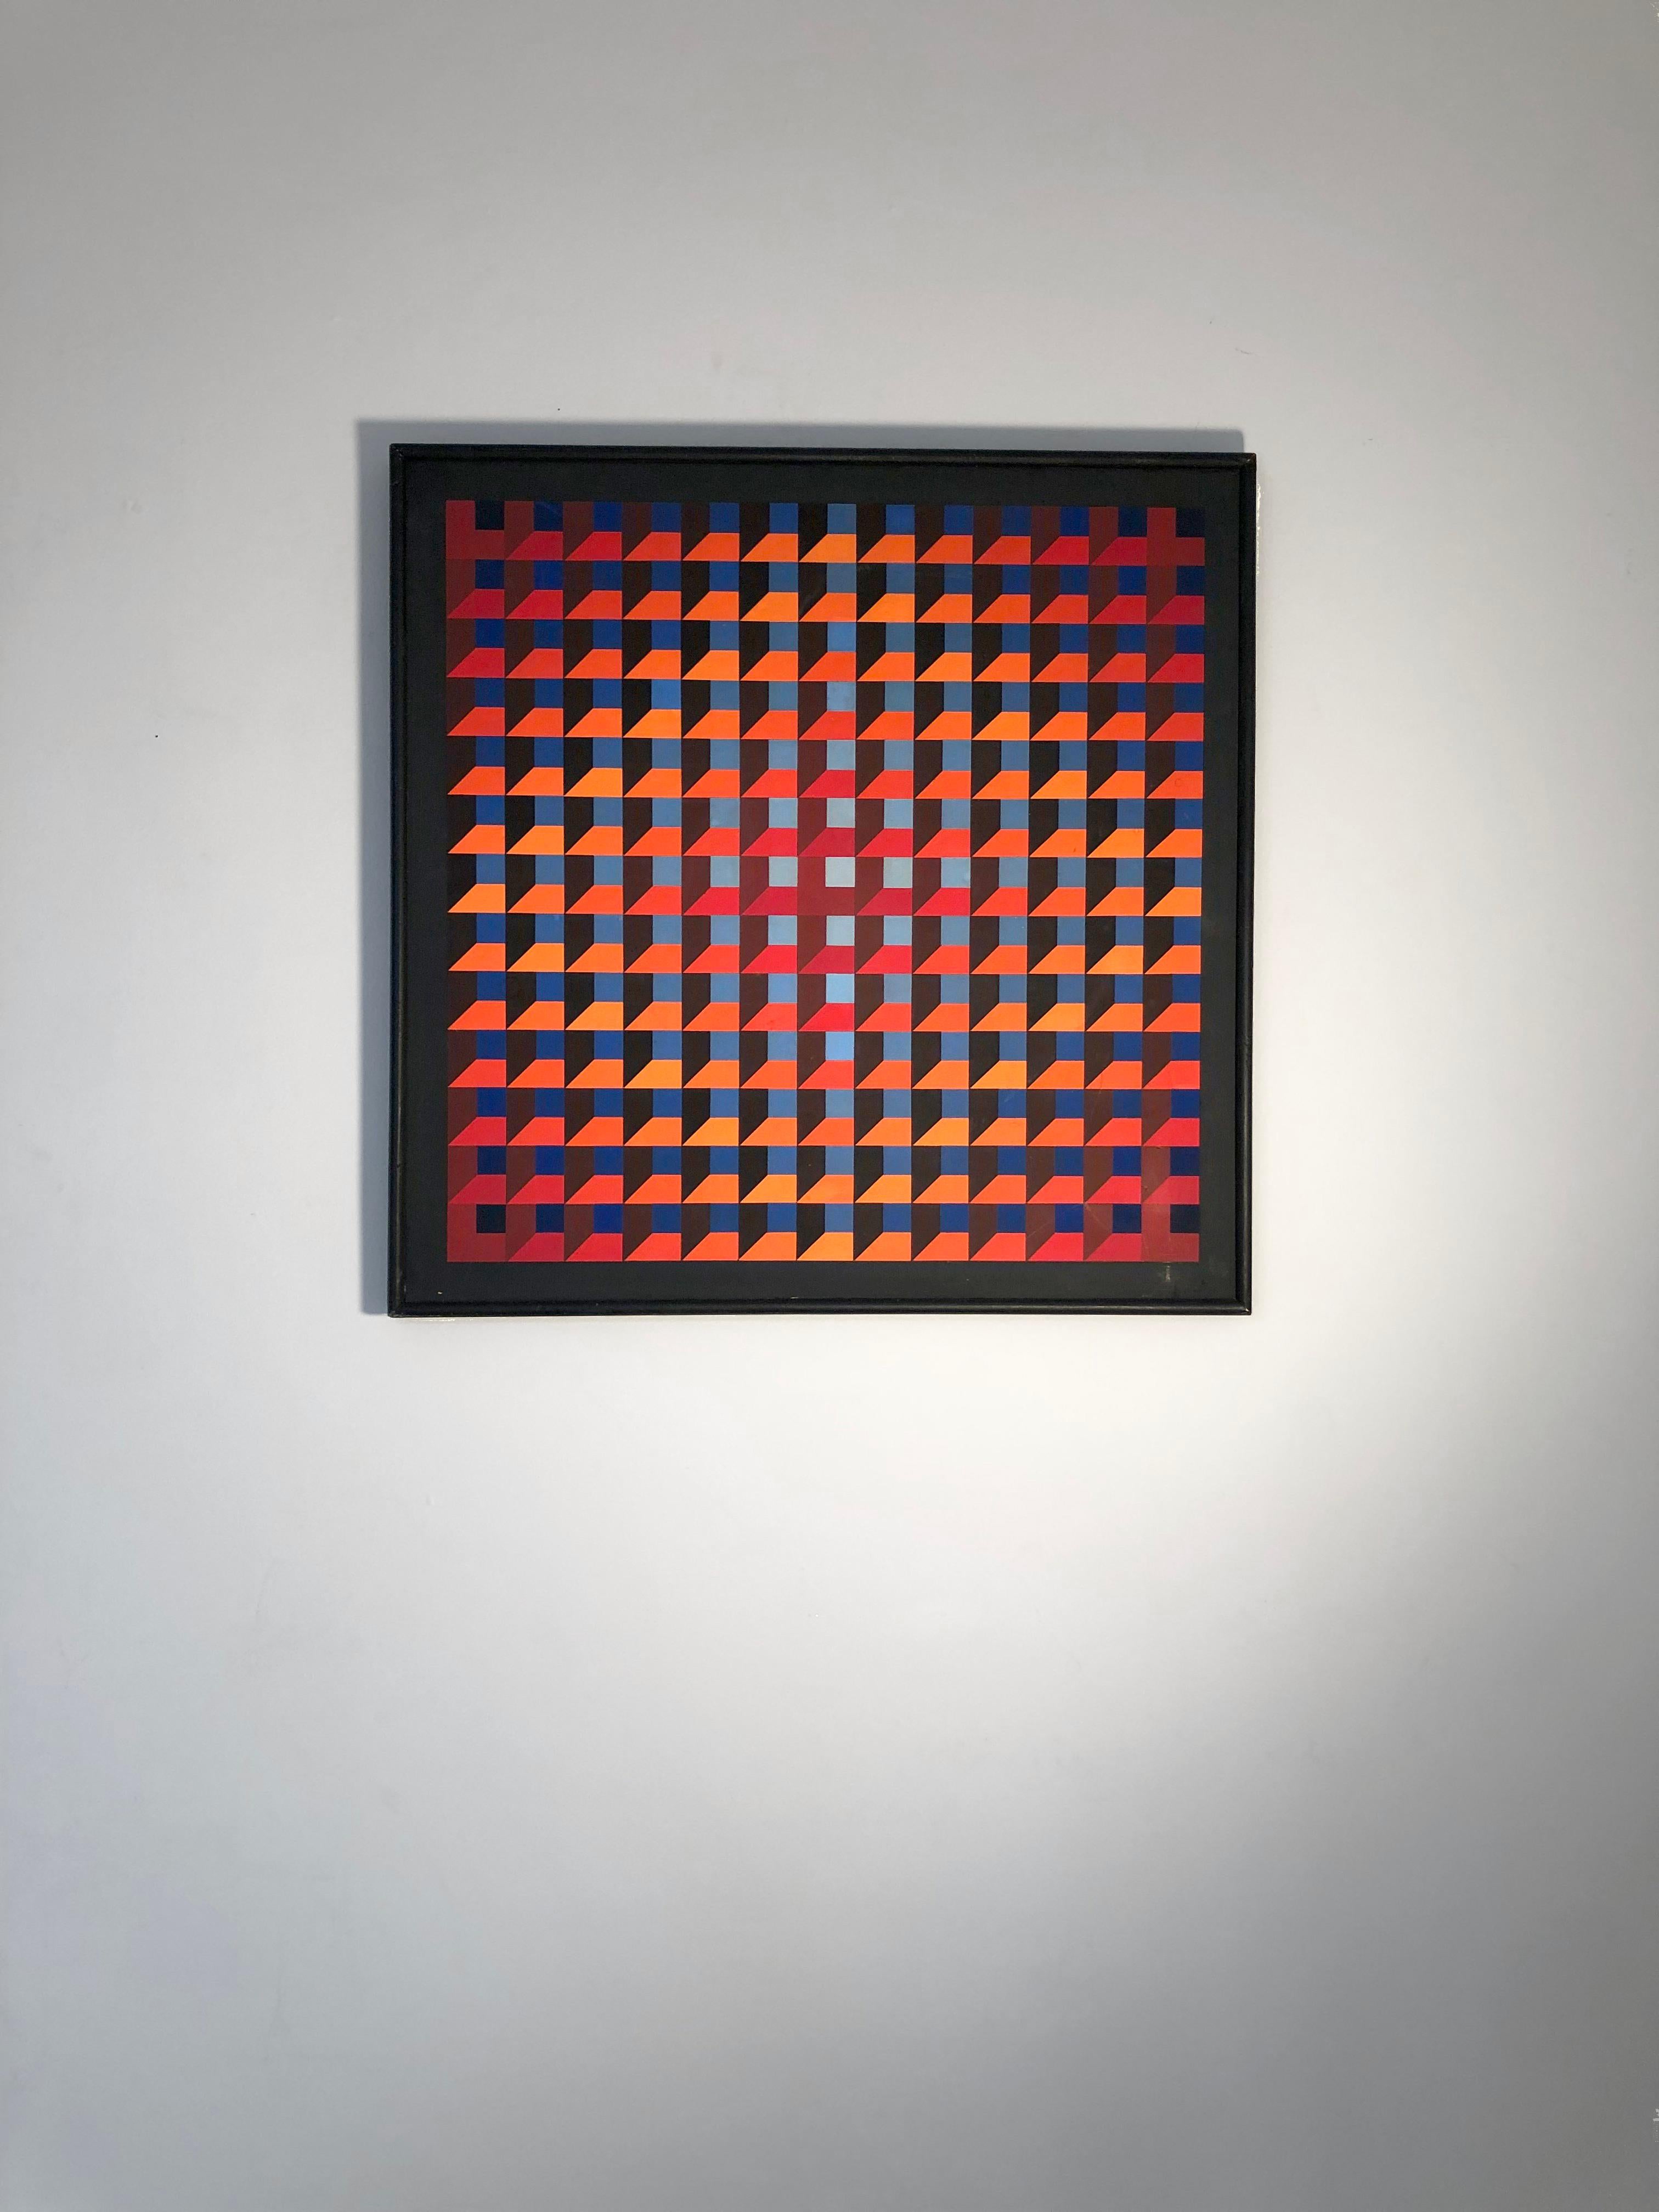 An authentic and unique kinetic painting thin and subtle gouache on wood panel, Abstract Geometric, Op-Art, Kinetic composition of orange and blue shades through thin complex architectural structures, creating a paradoxal open and closed / warm and